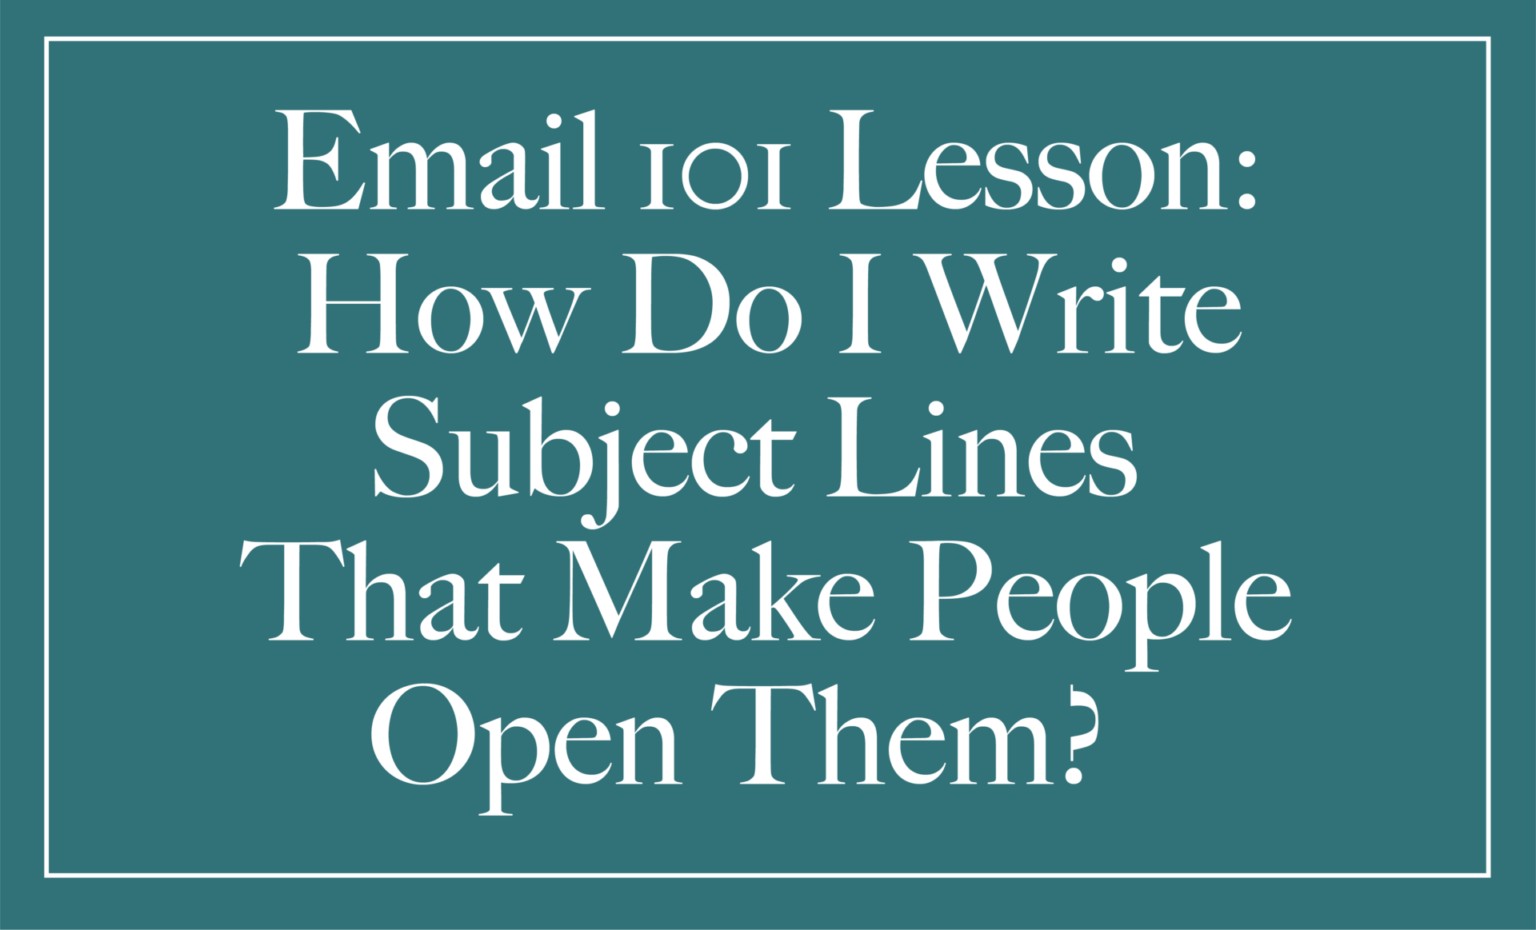 A green background that says "Email 101 Lesson: How do I write email subject lines that make people open them?"